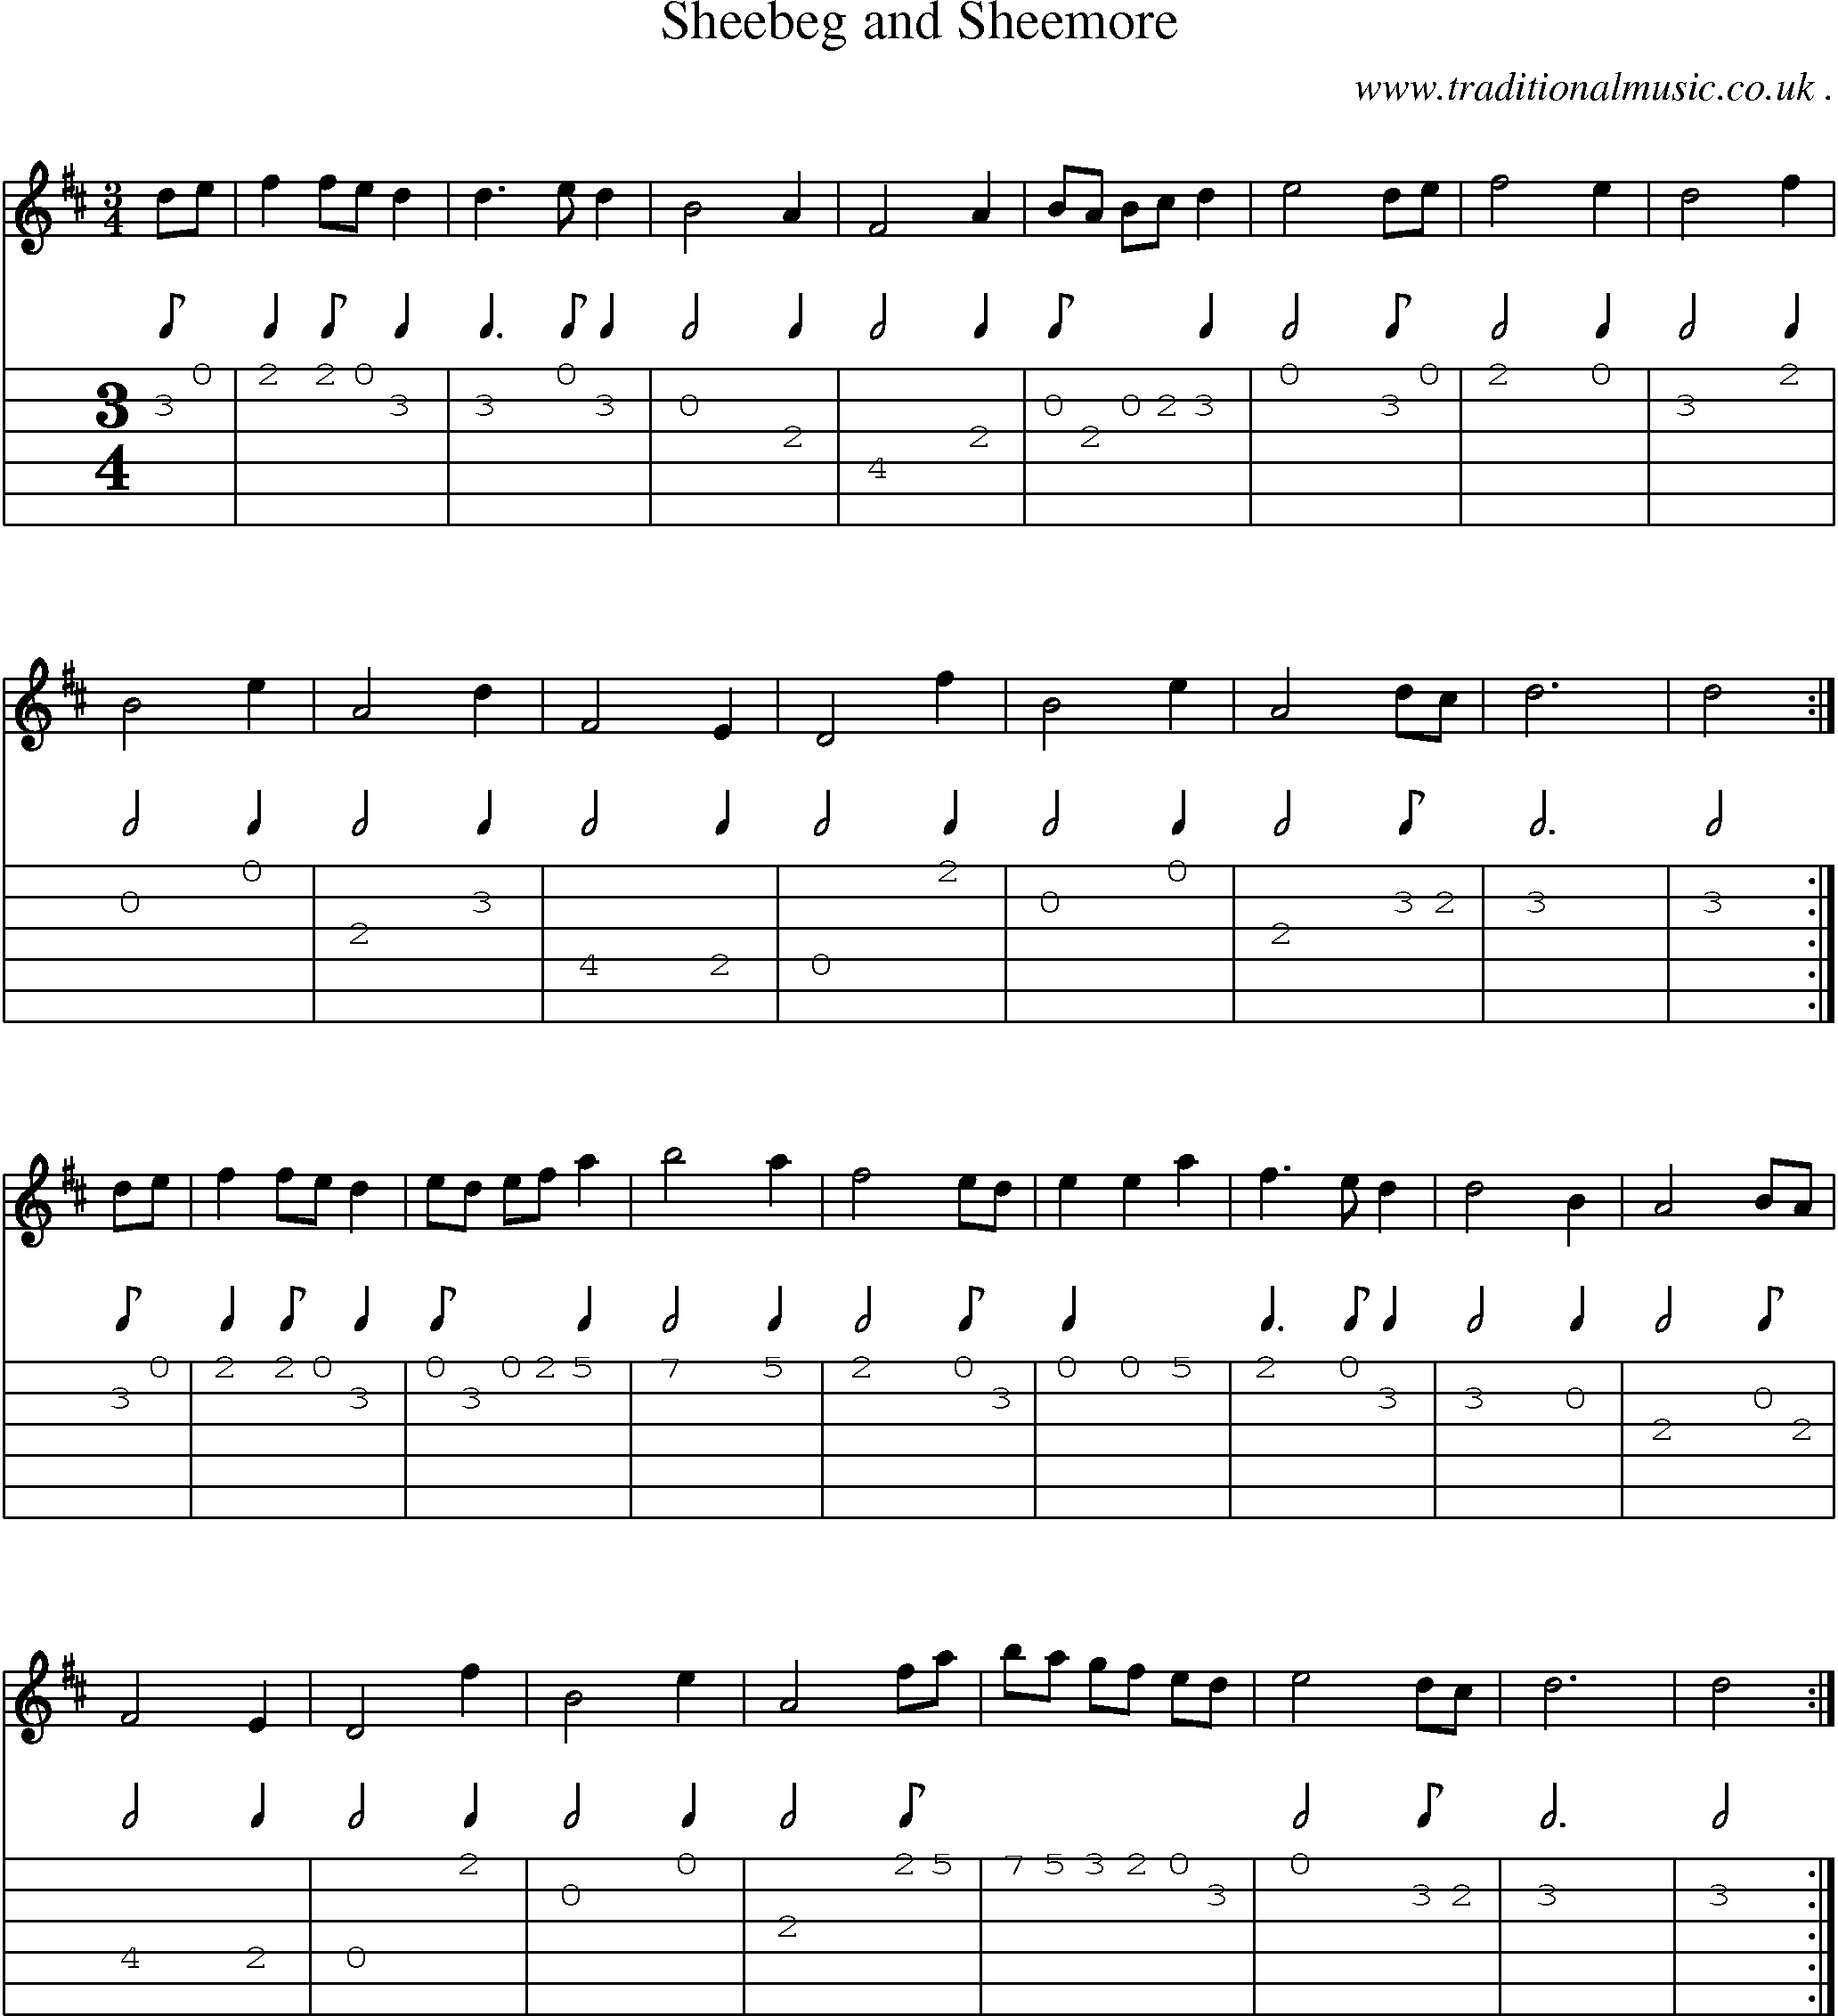 Sheet-Music and Guitar Tabs for Sheebeg And Sheemore